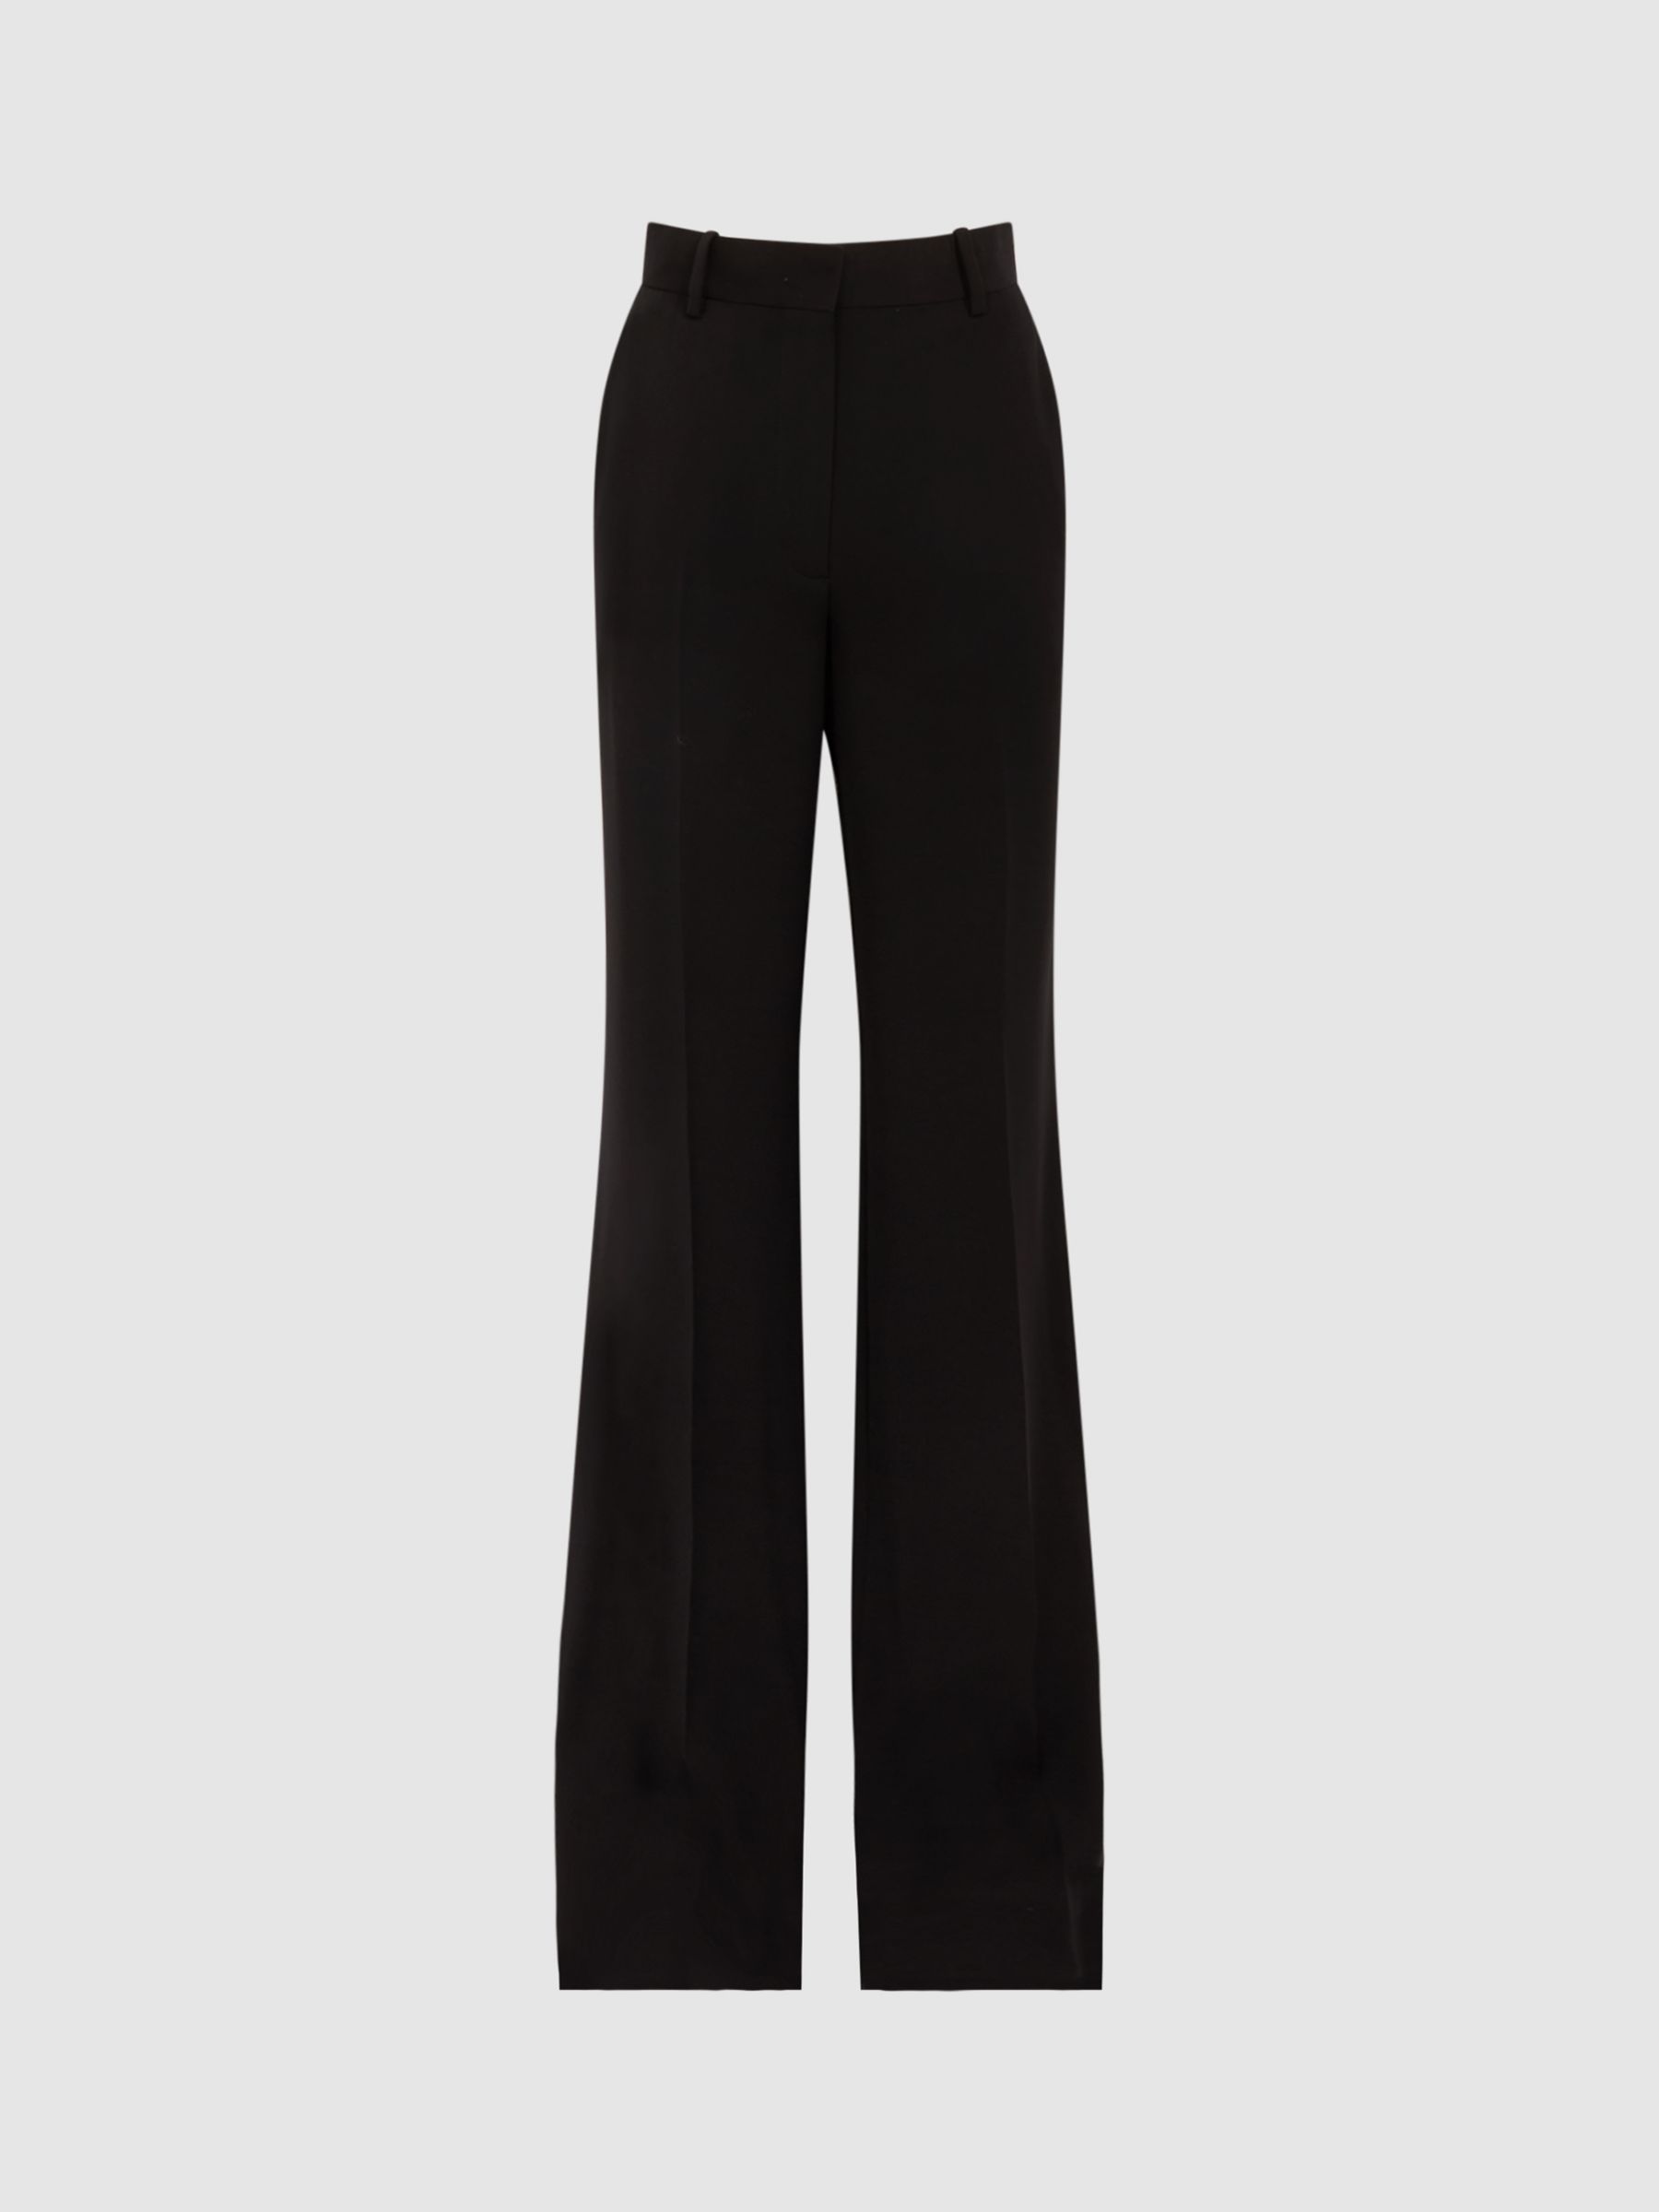 Reiss Petite Margeaux Tailored Trousers, Black at John Lewis & Partners